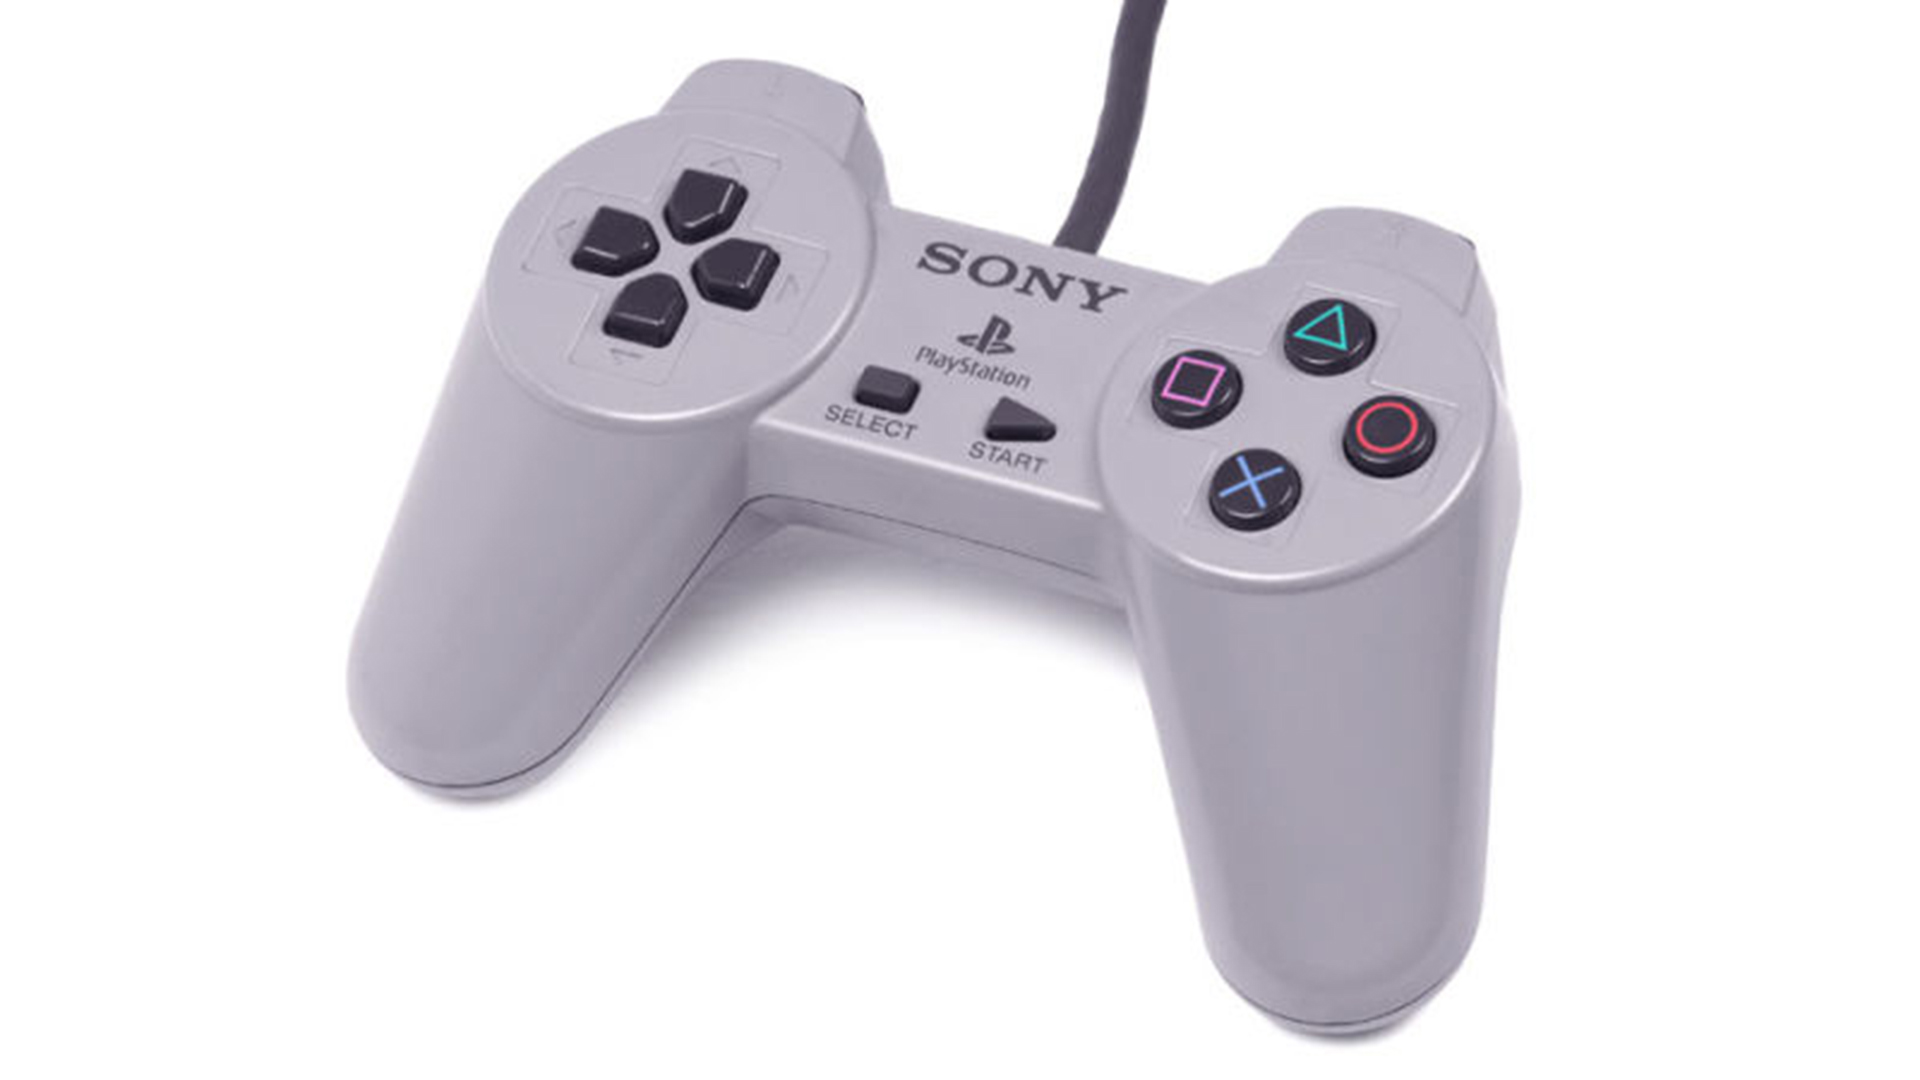 Game stick 15000. Dualshock ps1. PLAYSTATION 1 Gamepad. Джойстик сони 1. Ps1 Controller.